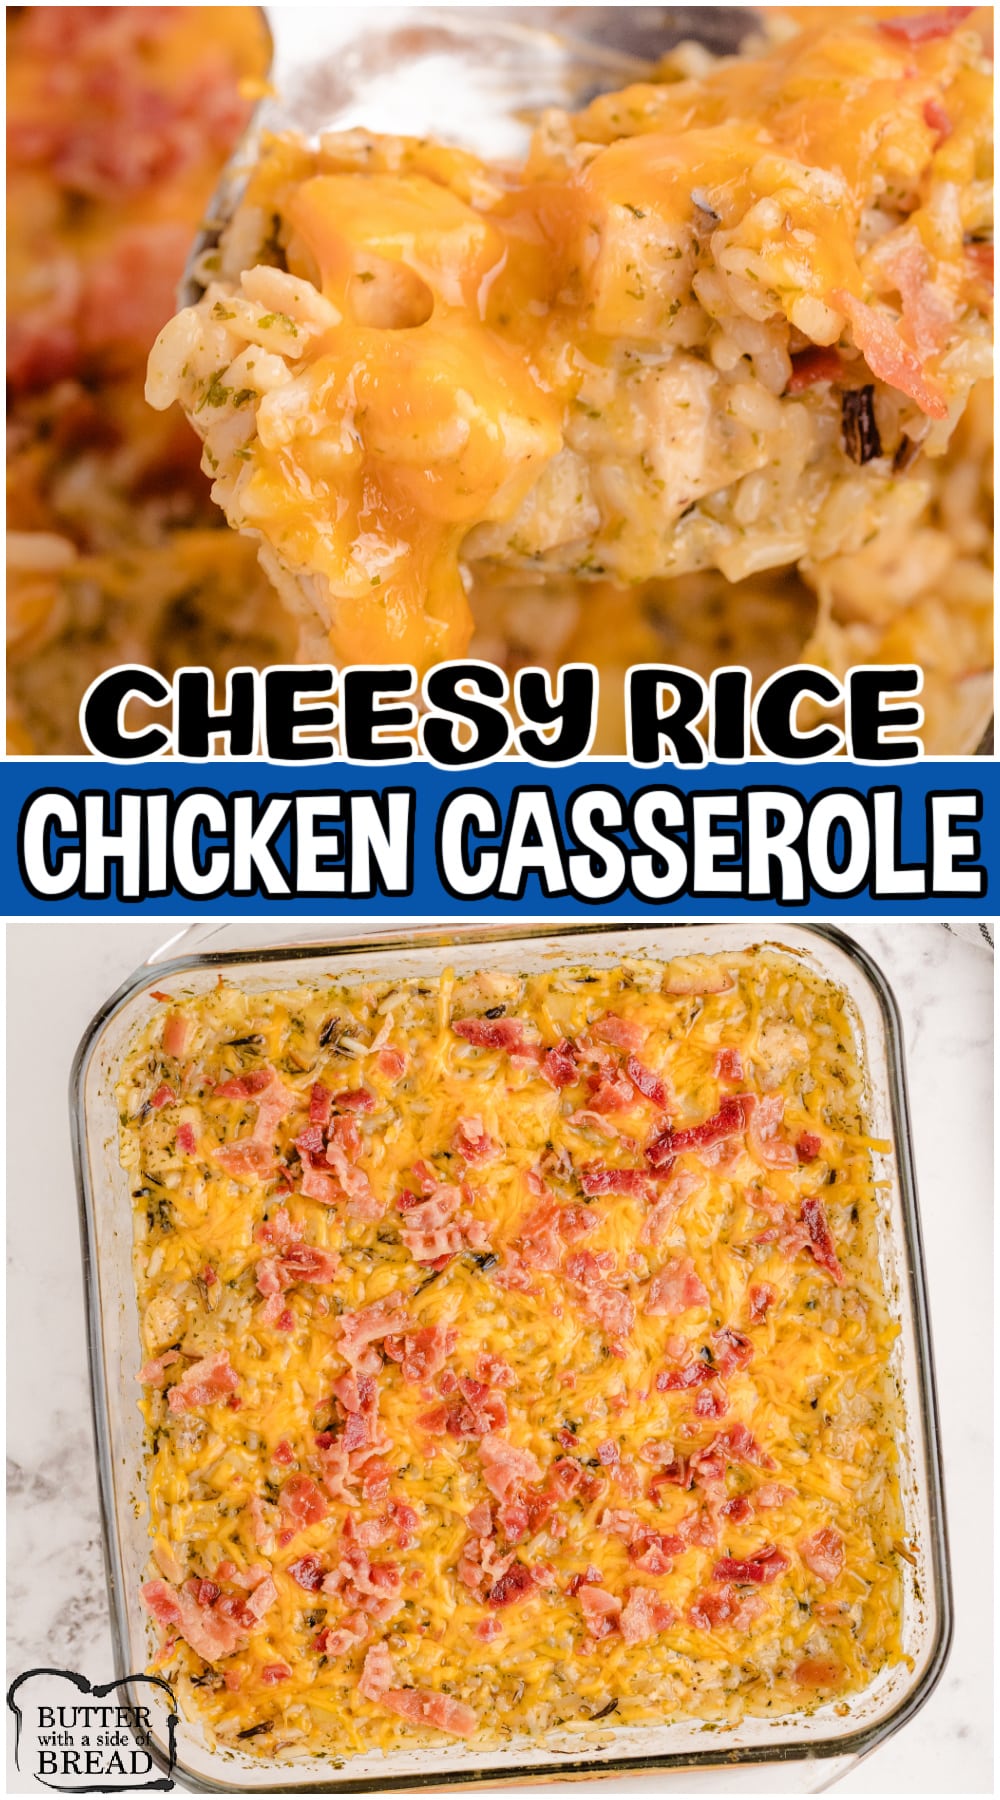 Cheesy Wild Rice Casserole is a fantastic weeknight dinner recipe made with chicken, apples, bacon & wild rice. This chicken and wild rice casserole is made easy with simple ingredients & perfect for Fall.